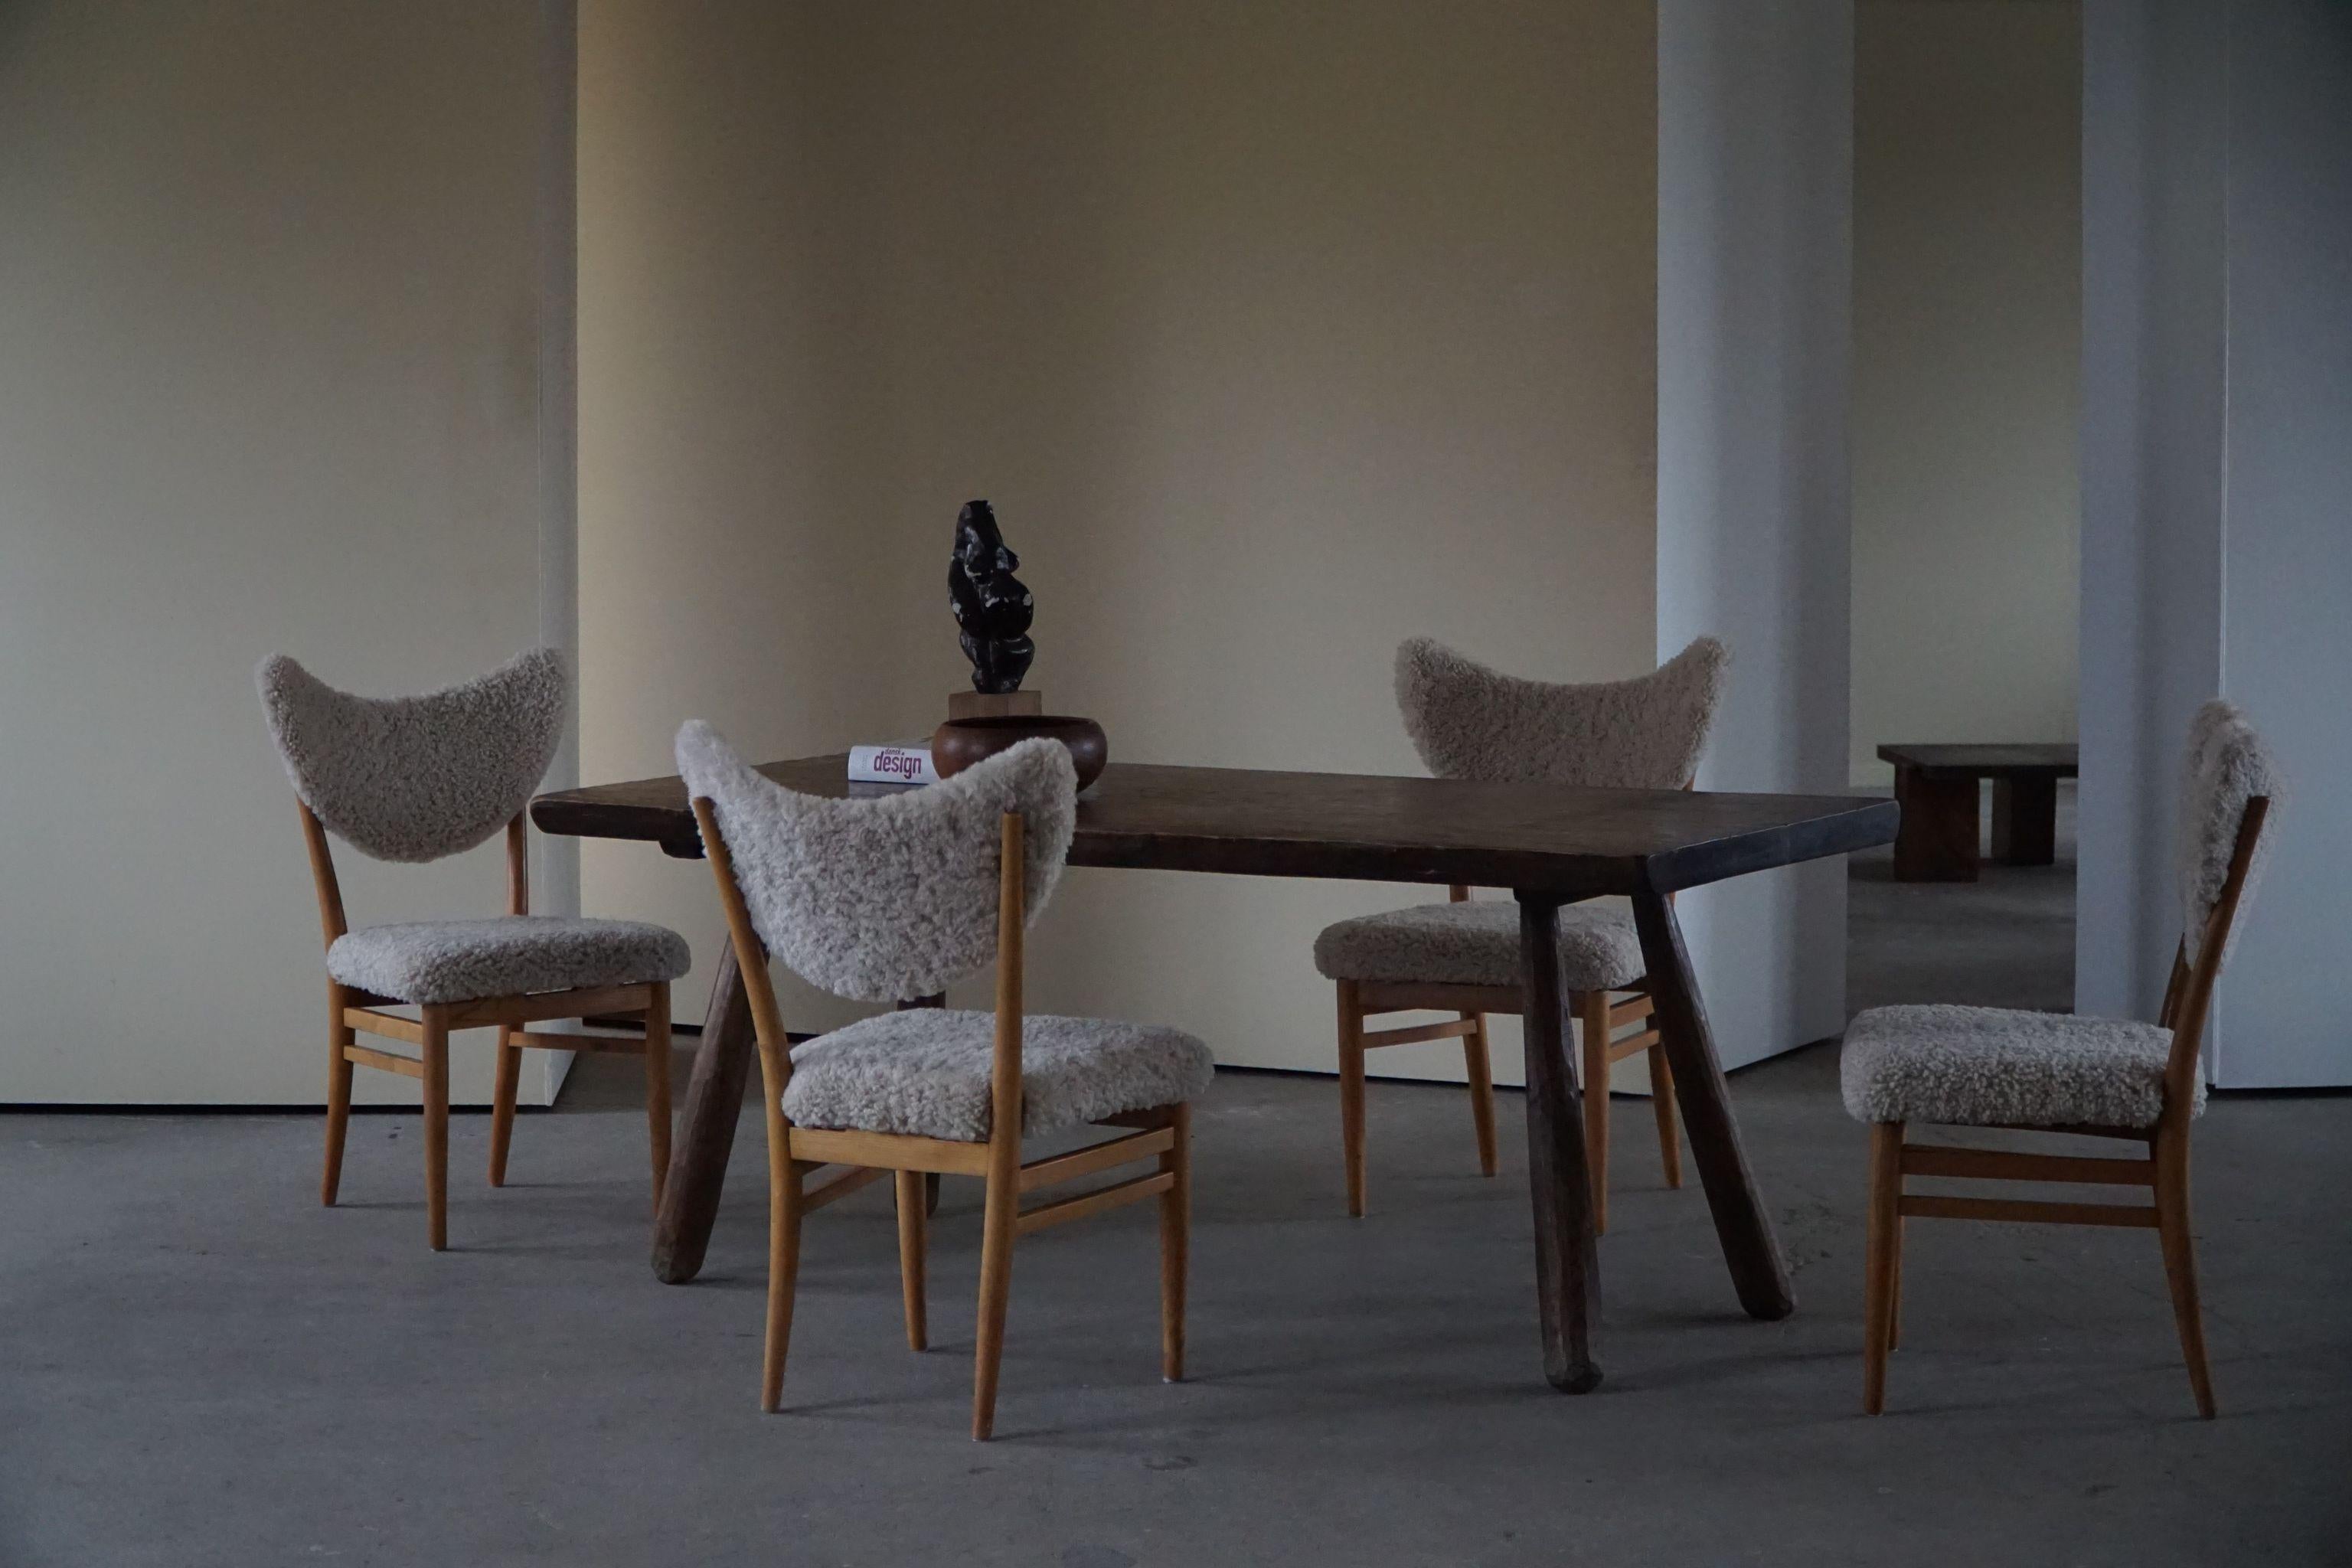 Hvidt & Mølgaard, Set of 4 Chairs in Ash, Reupholstered in Lambswool, 1950s 1